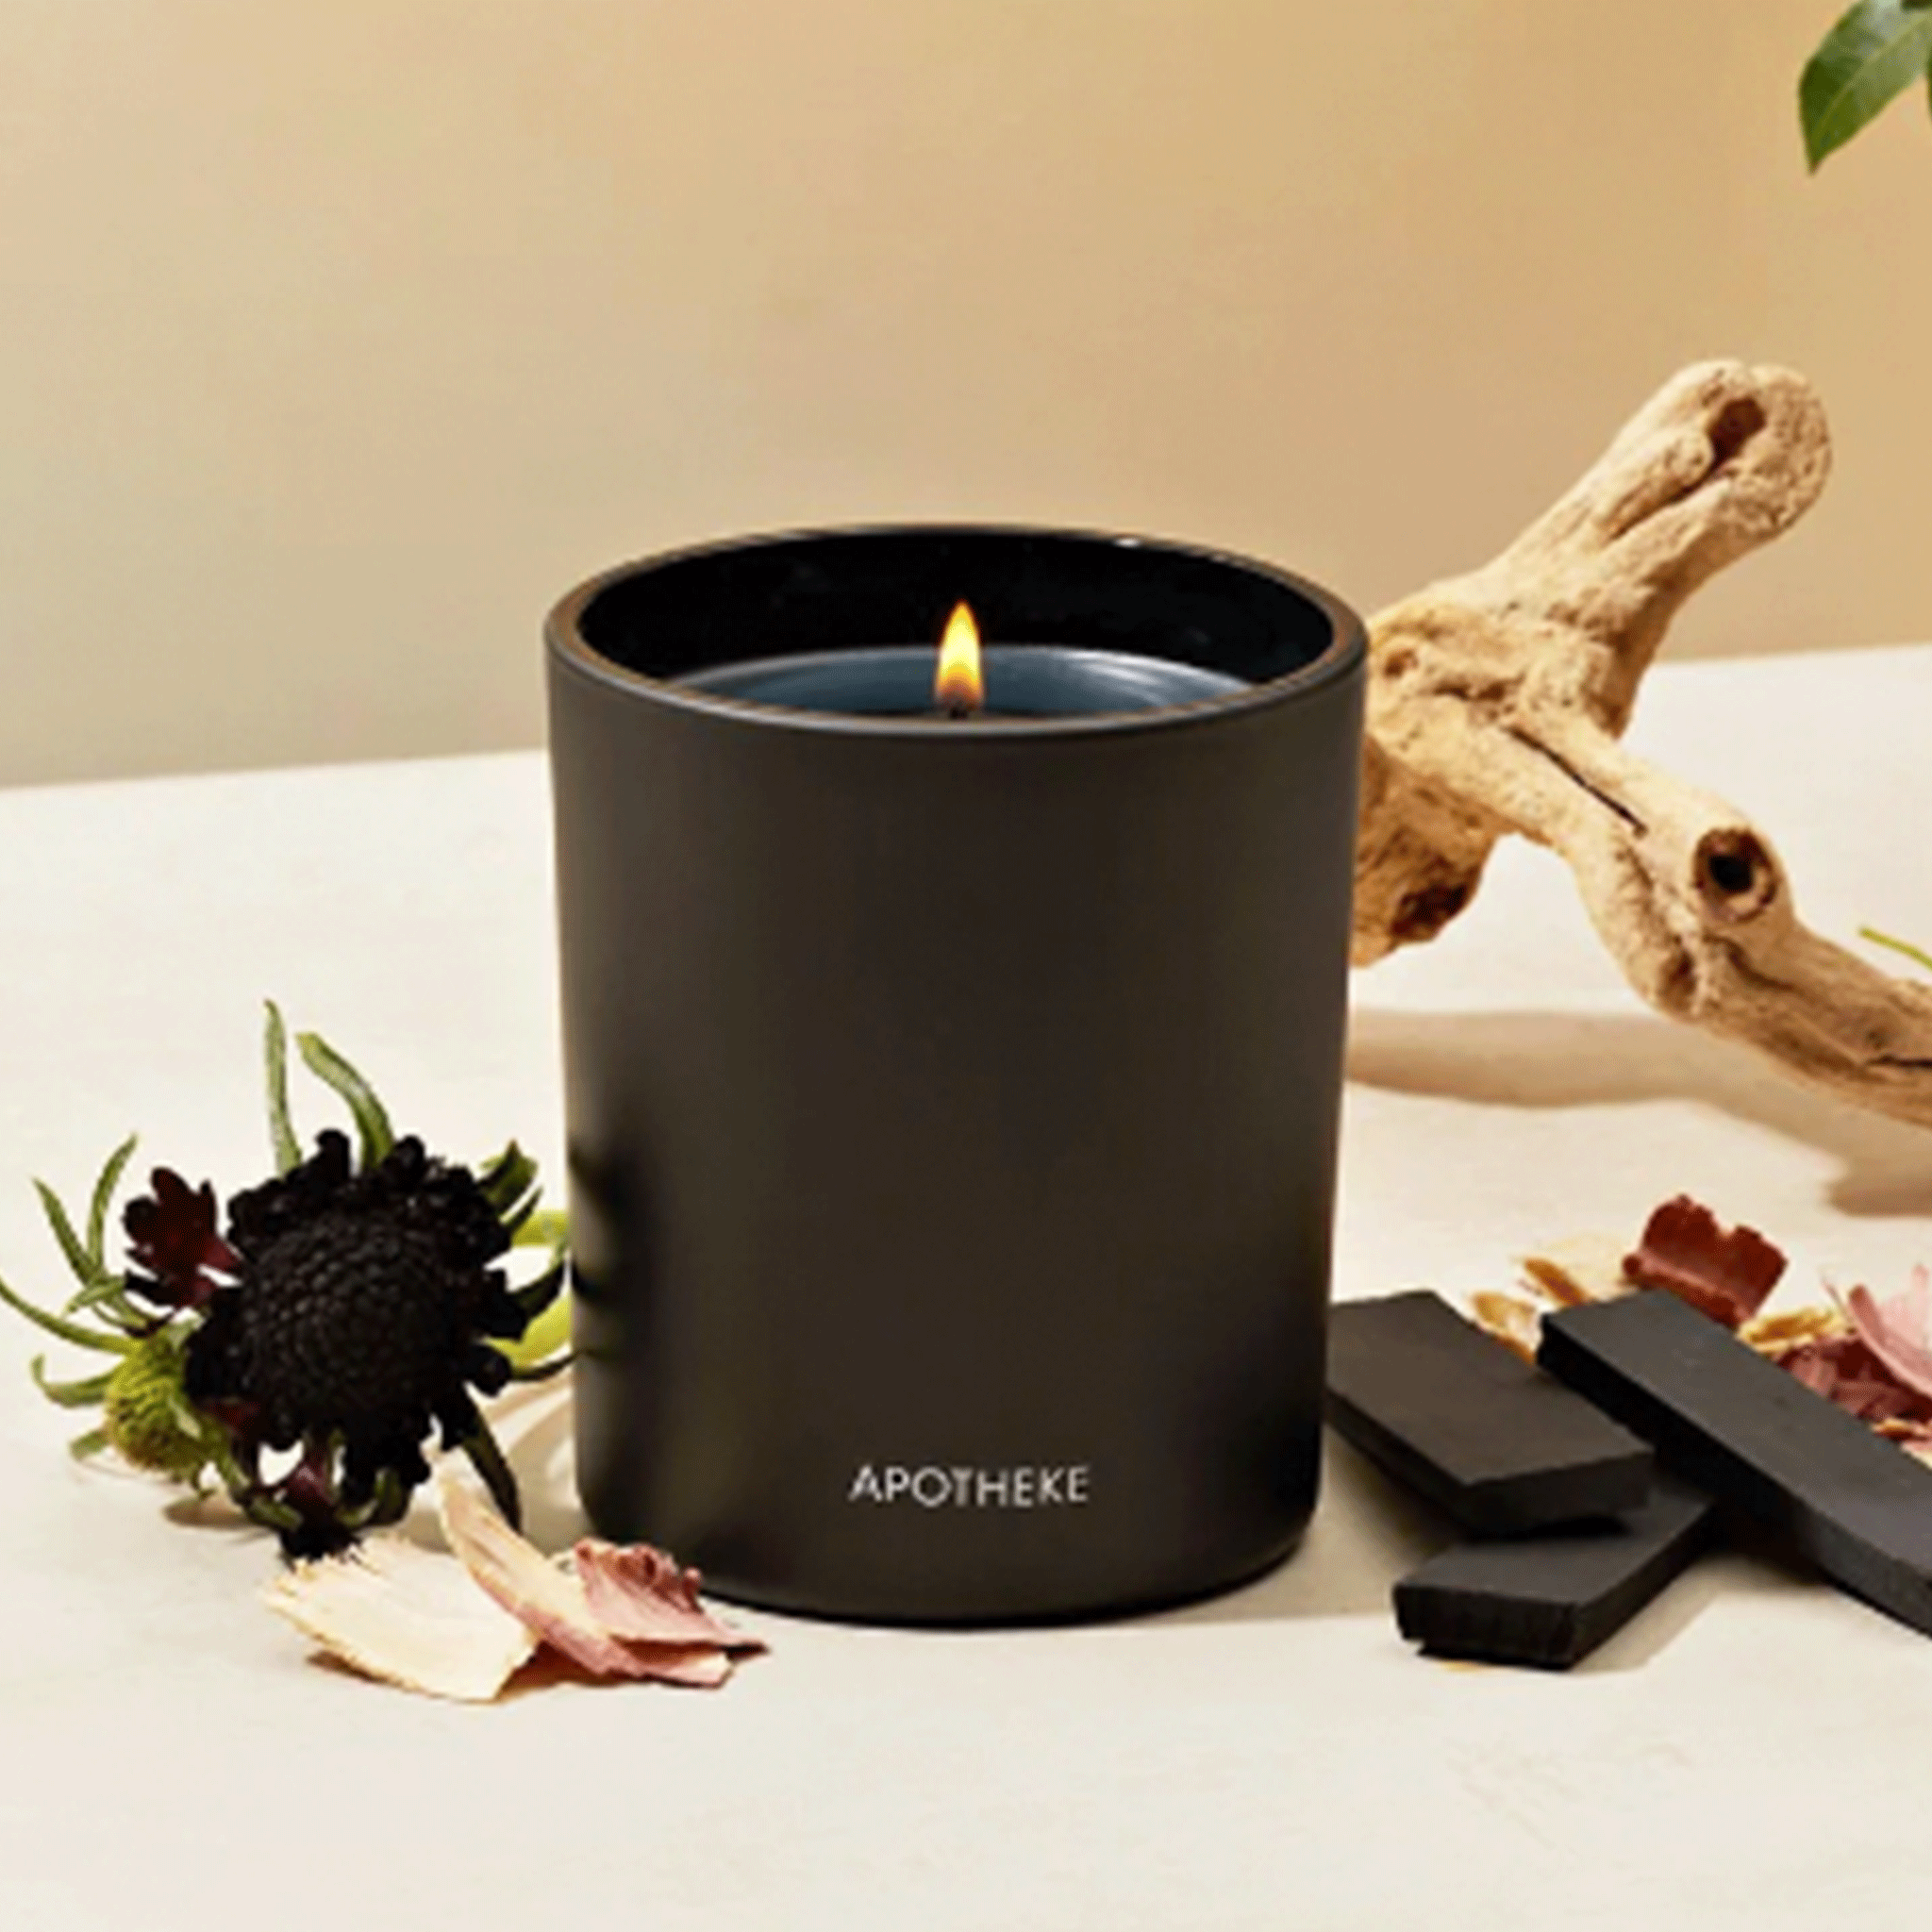 On a tan background is a black jarred candle with white text at the bottom that reads, "Apotheke". 